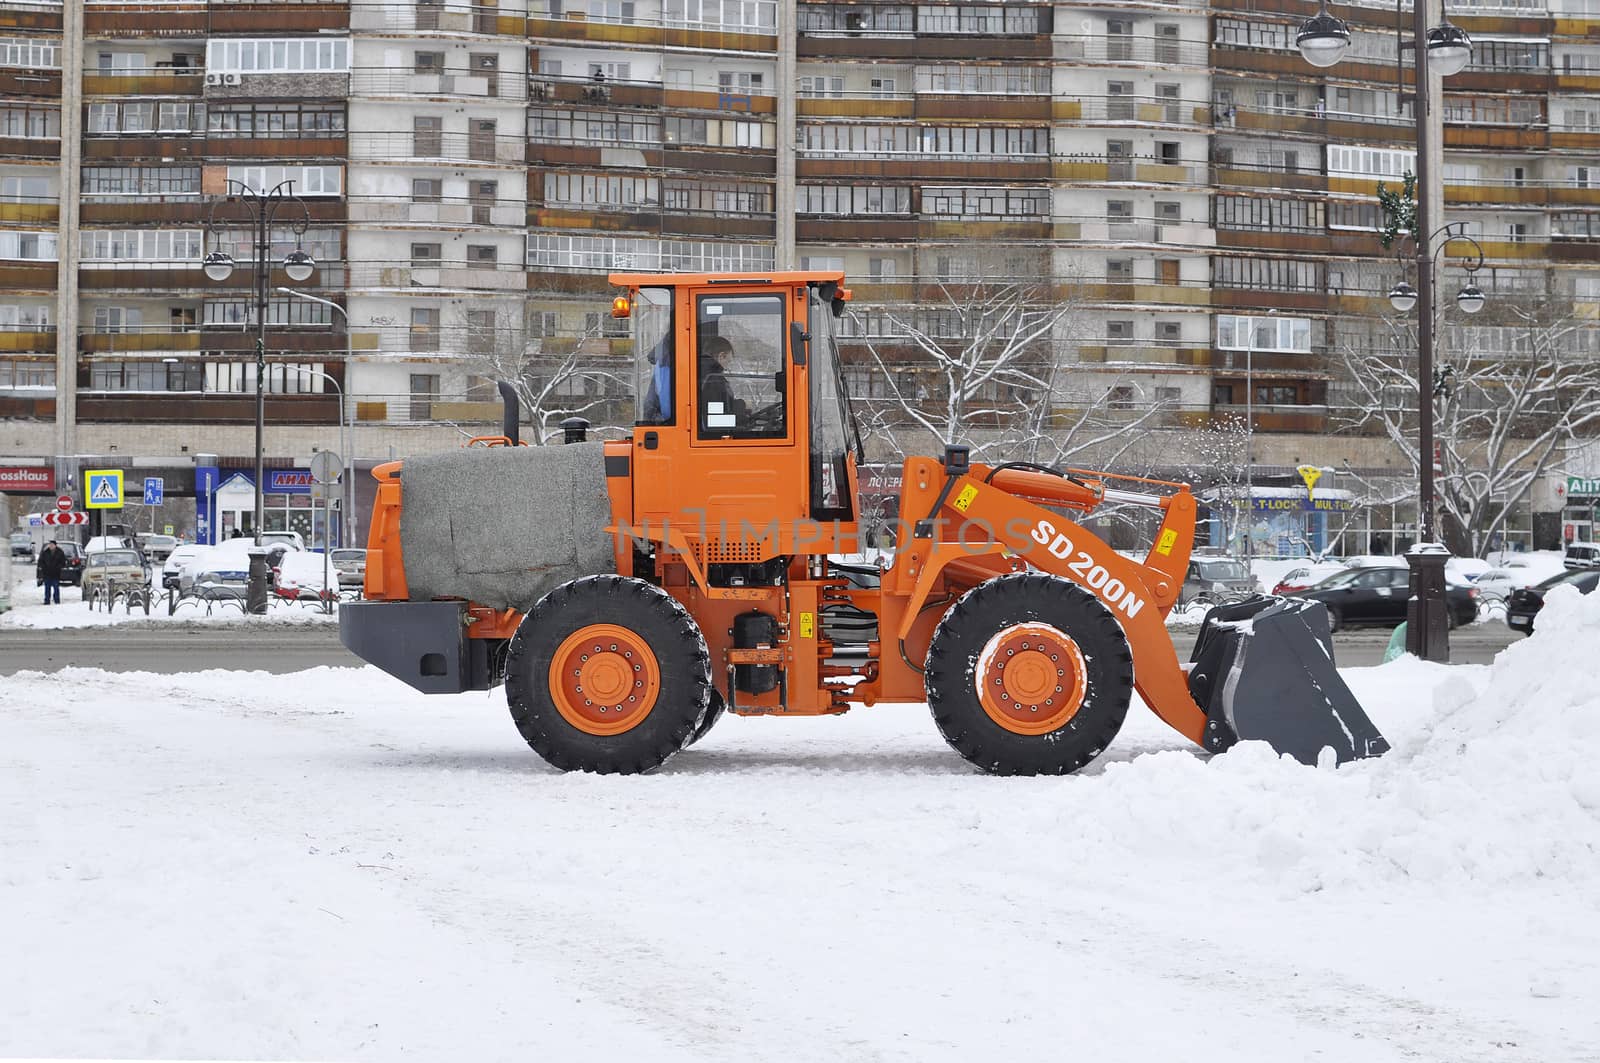 Cleaning of snow by means of special equipment. by veronka72